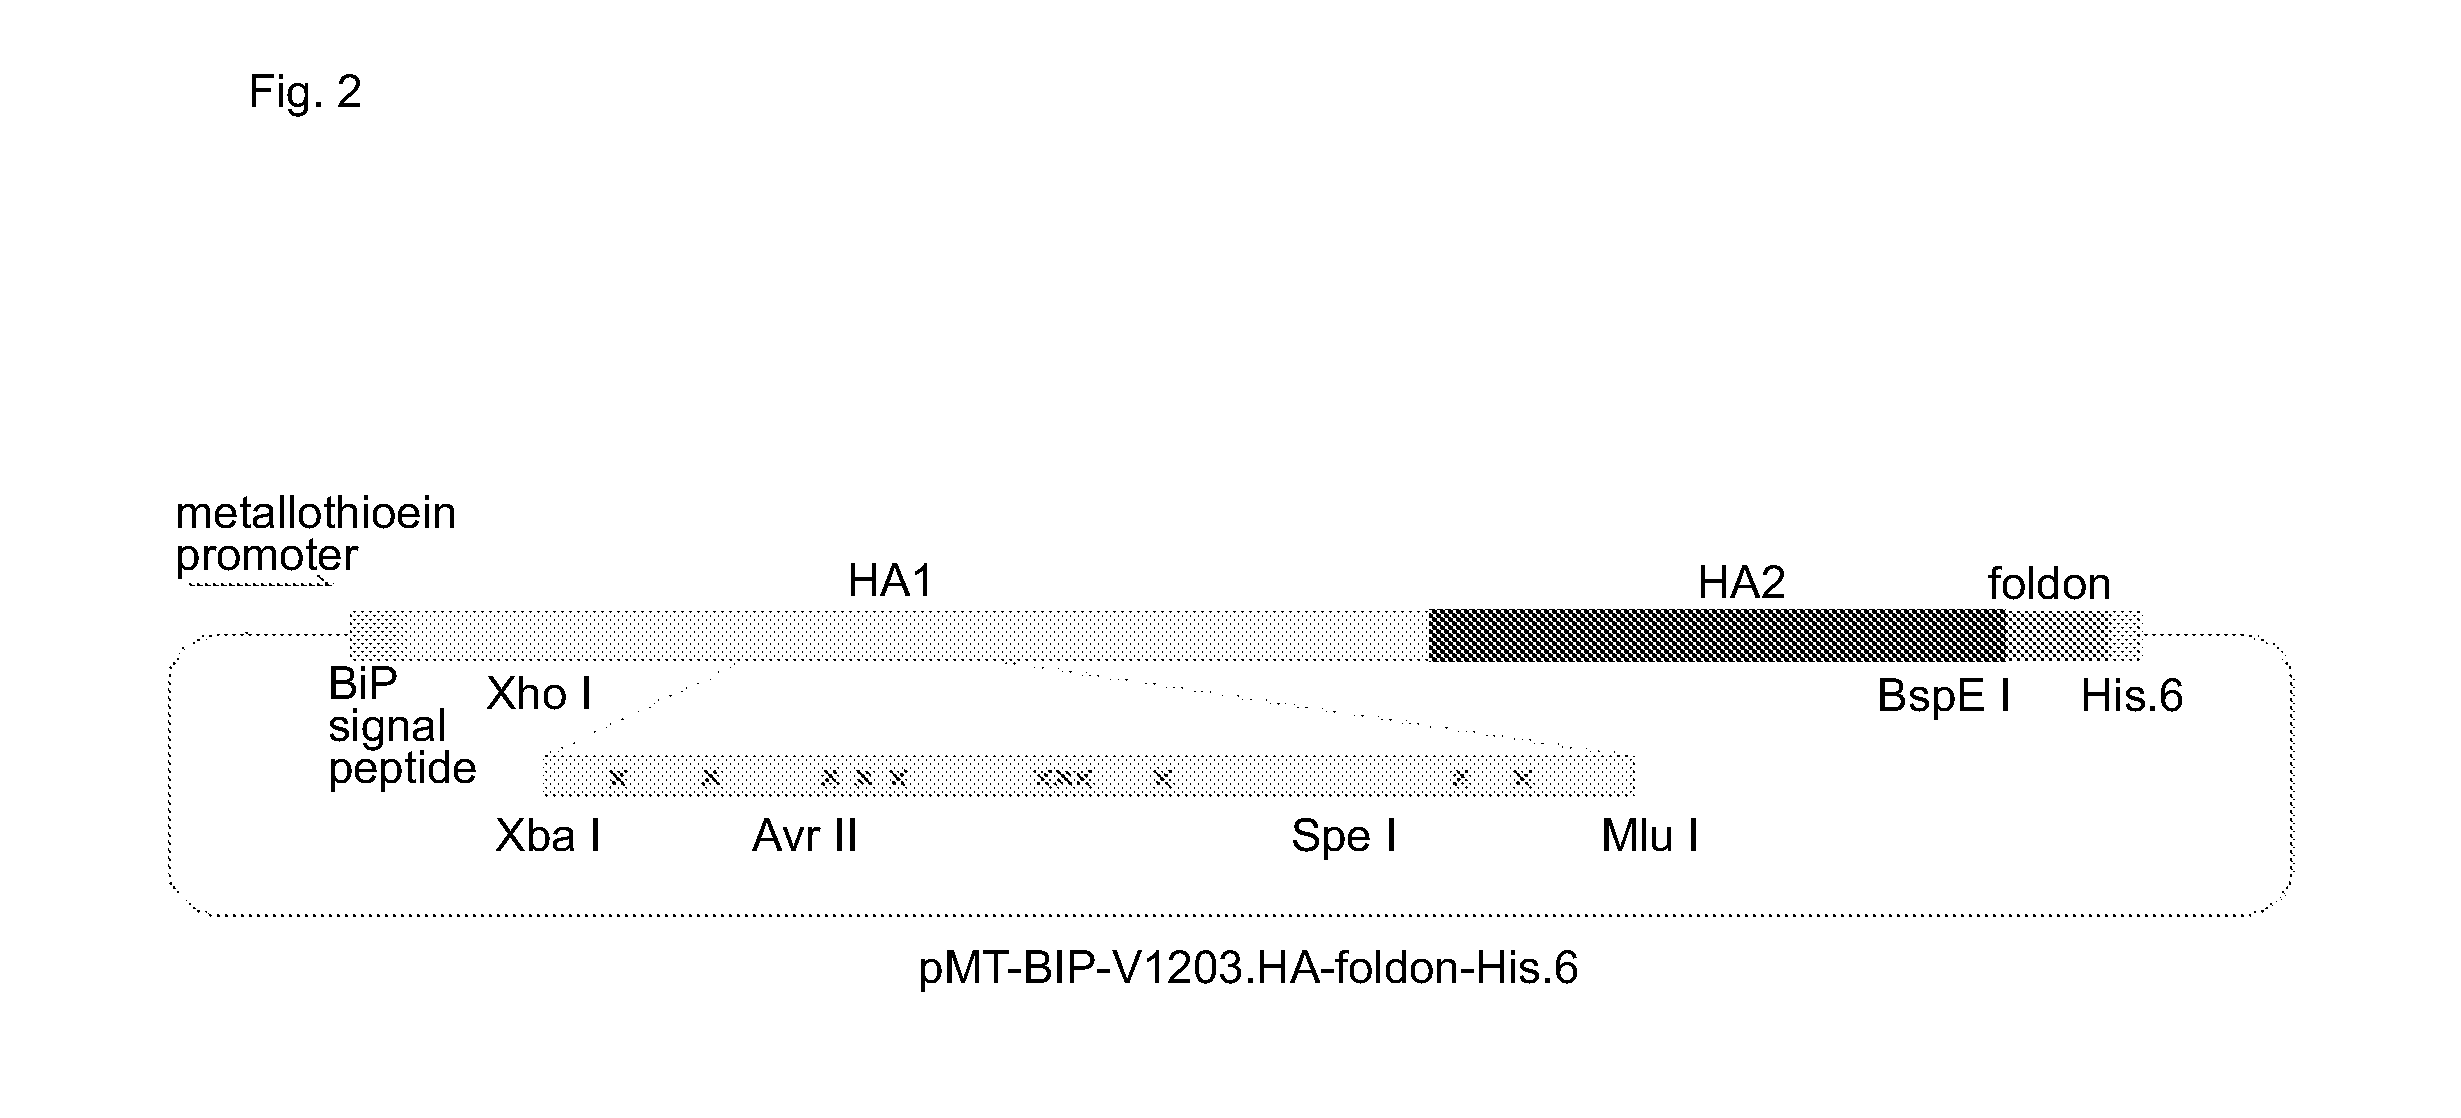 Vaccine antigens that direct immunity to conserved epitopes